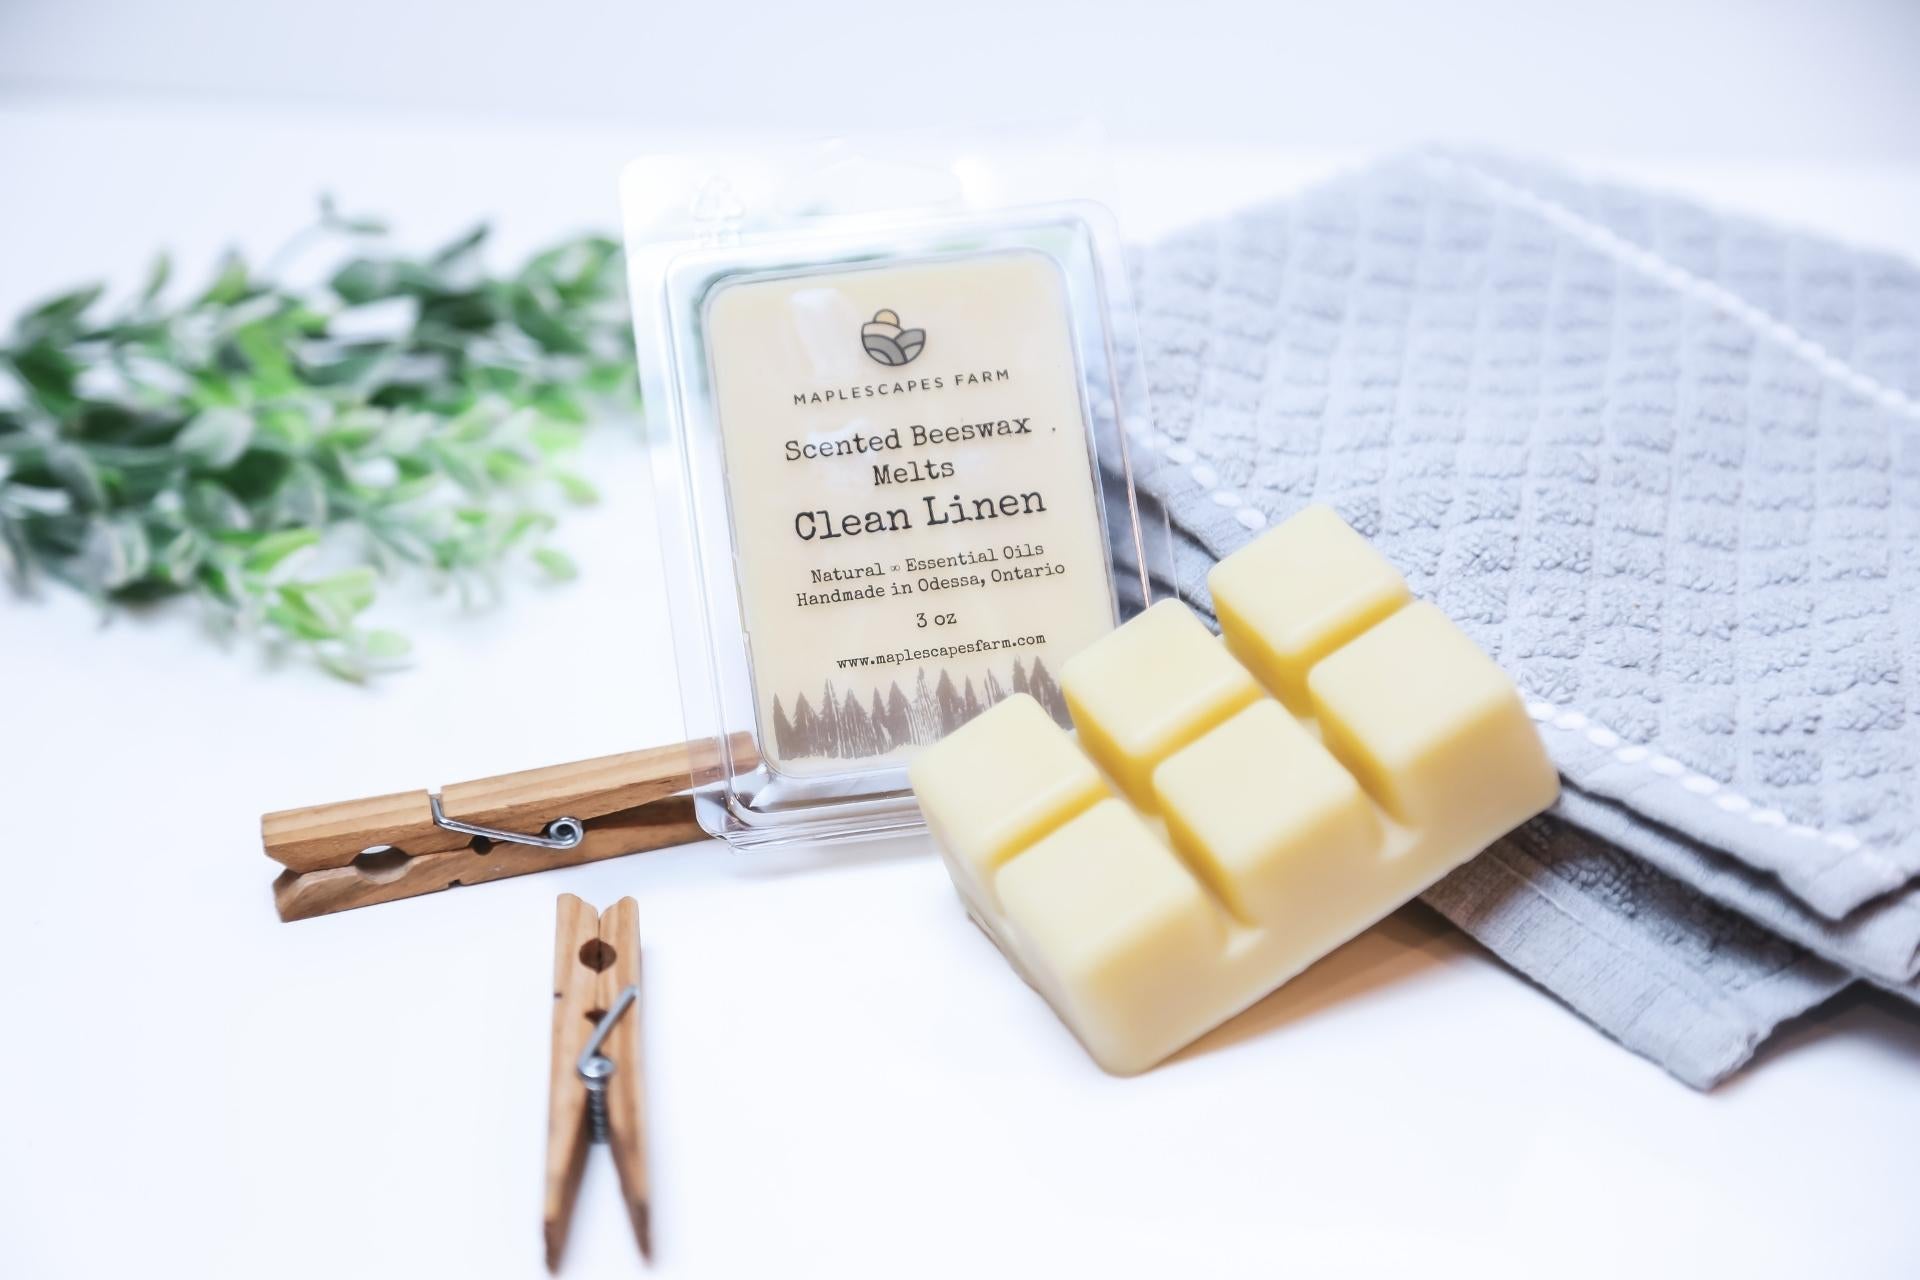 Maplescapes Farm Clean Linen Scented Beeswax Melts